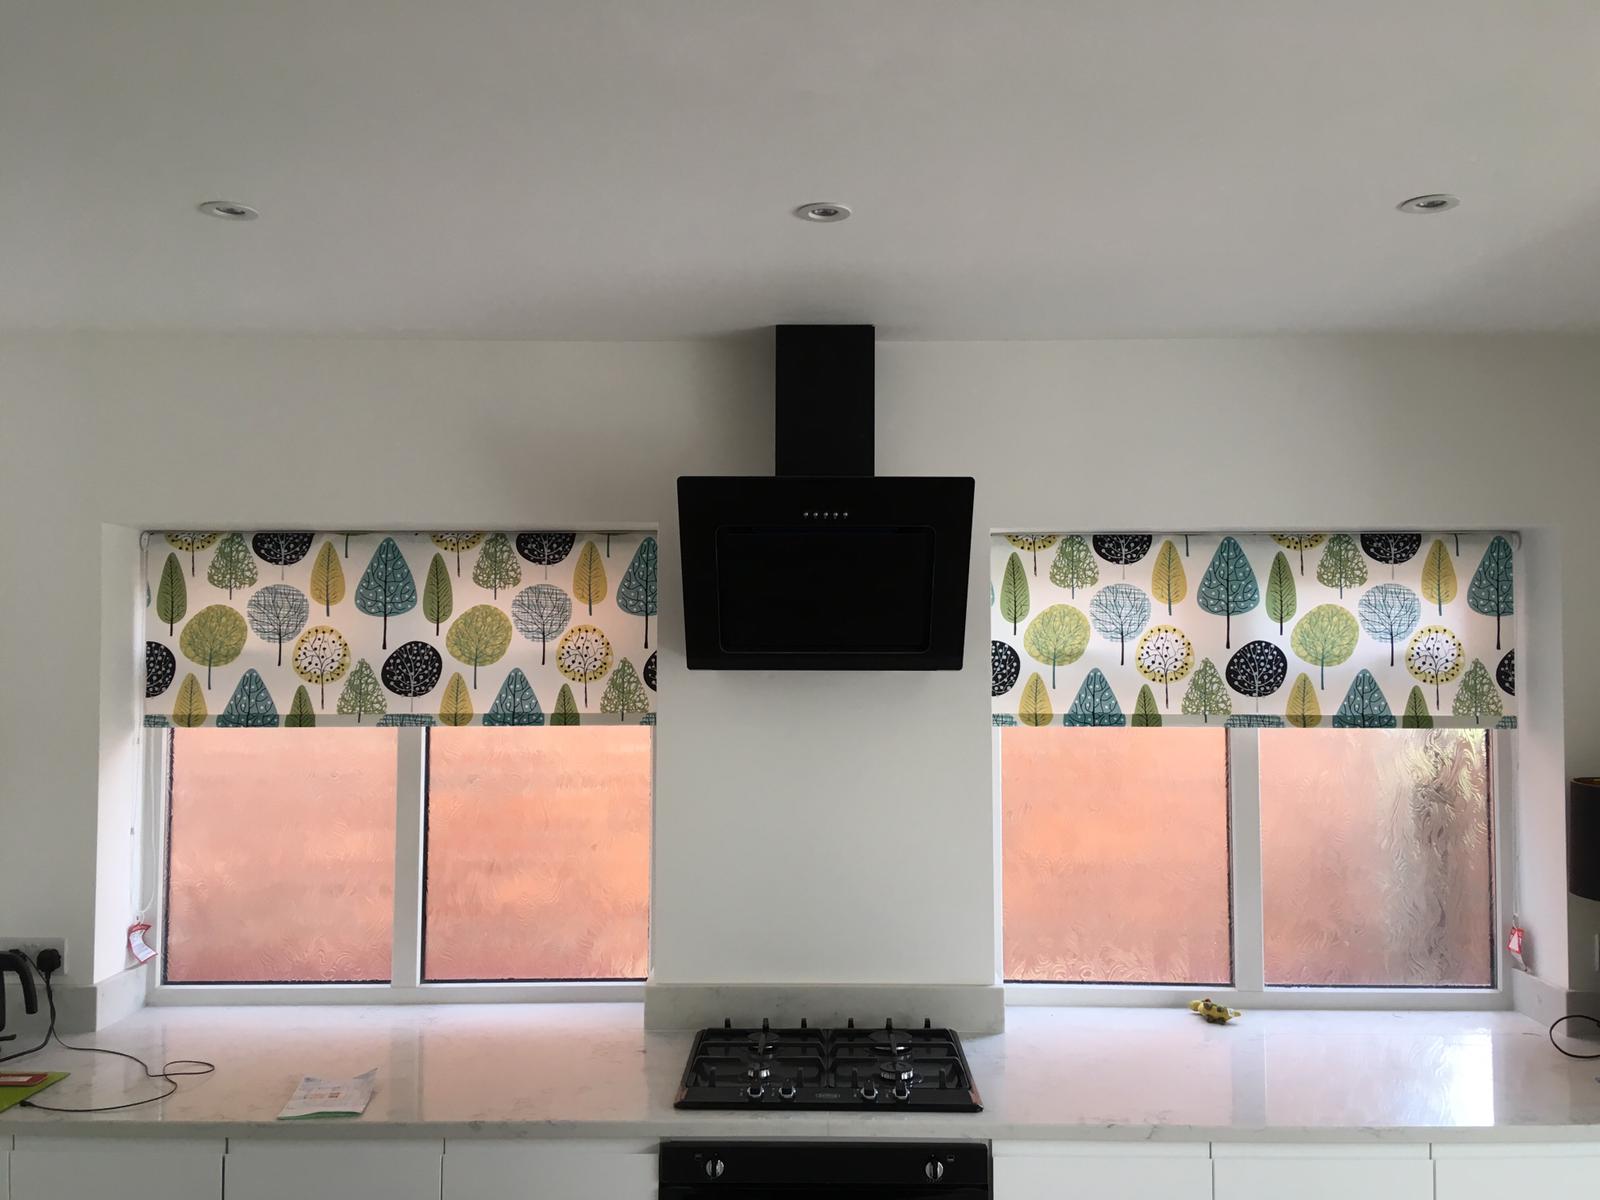 Suppliers of Contemporary Roller Blinds Designs UK